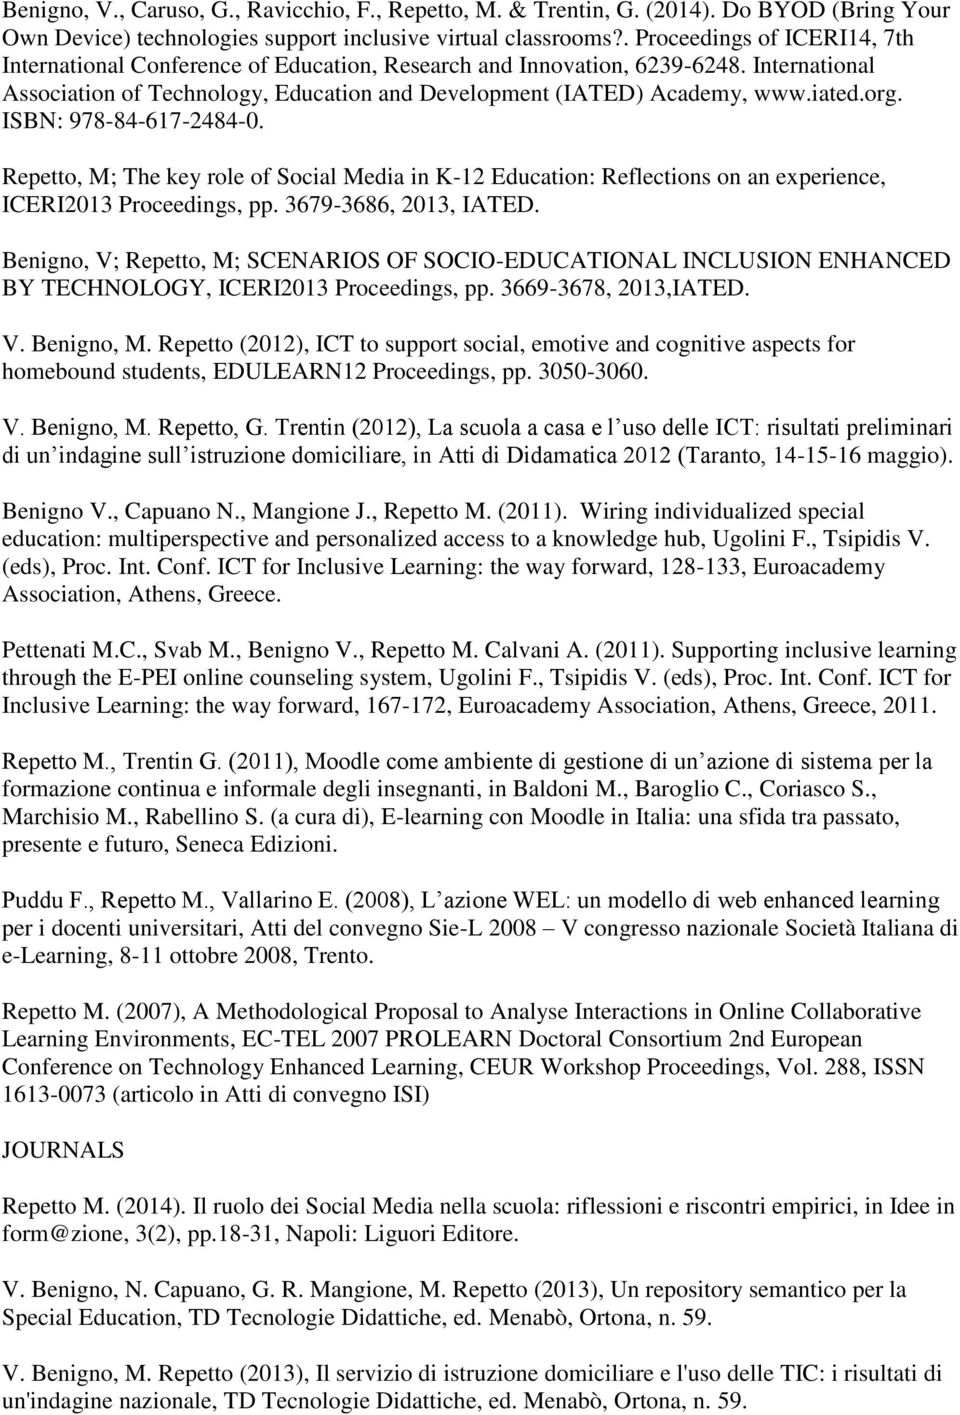 org. ISBN: 978-84-617-2484-0. Repetto, M; The key role of Social Media in K-12 Education: Reflections on an experience, ICERI2013 Proceedings, pp. 3679-3686, 2013, IATED.